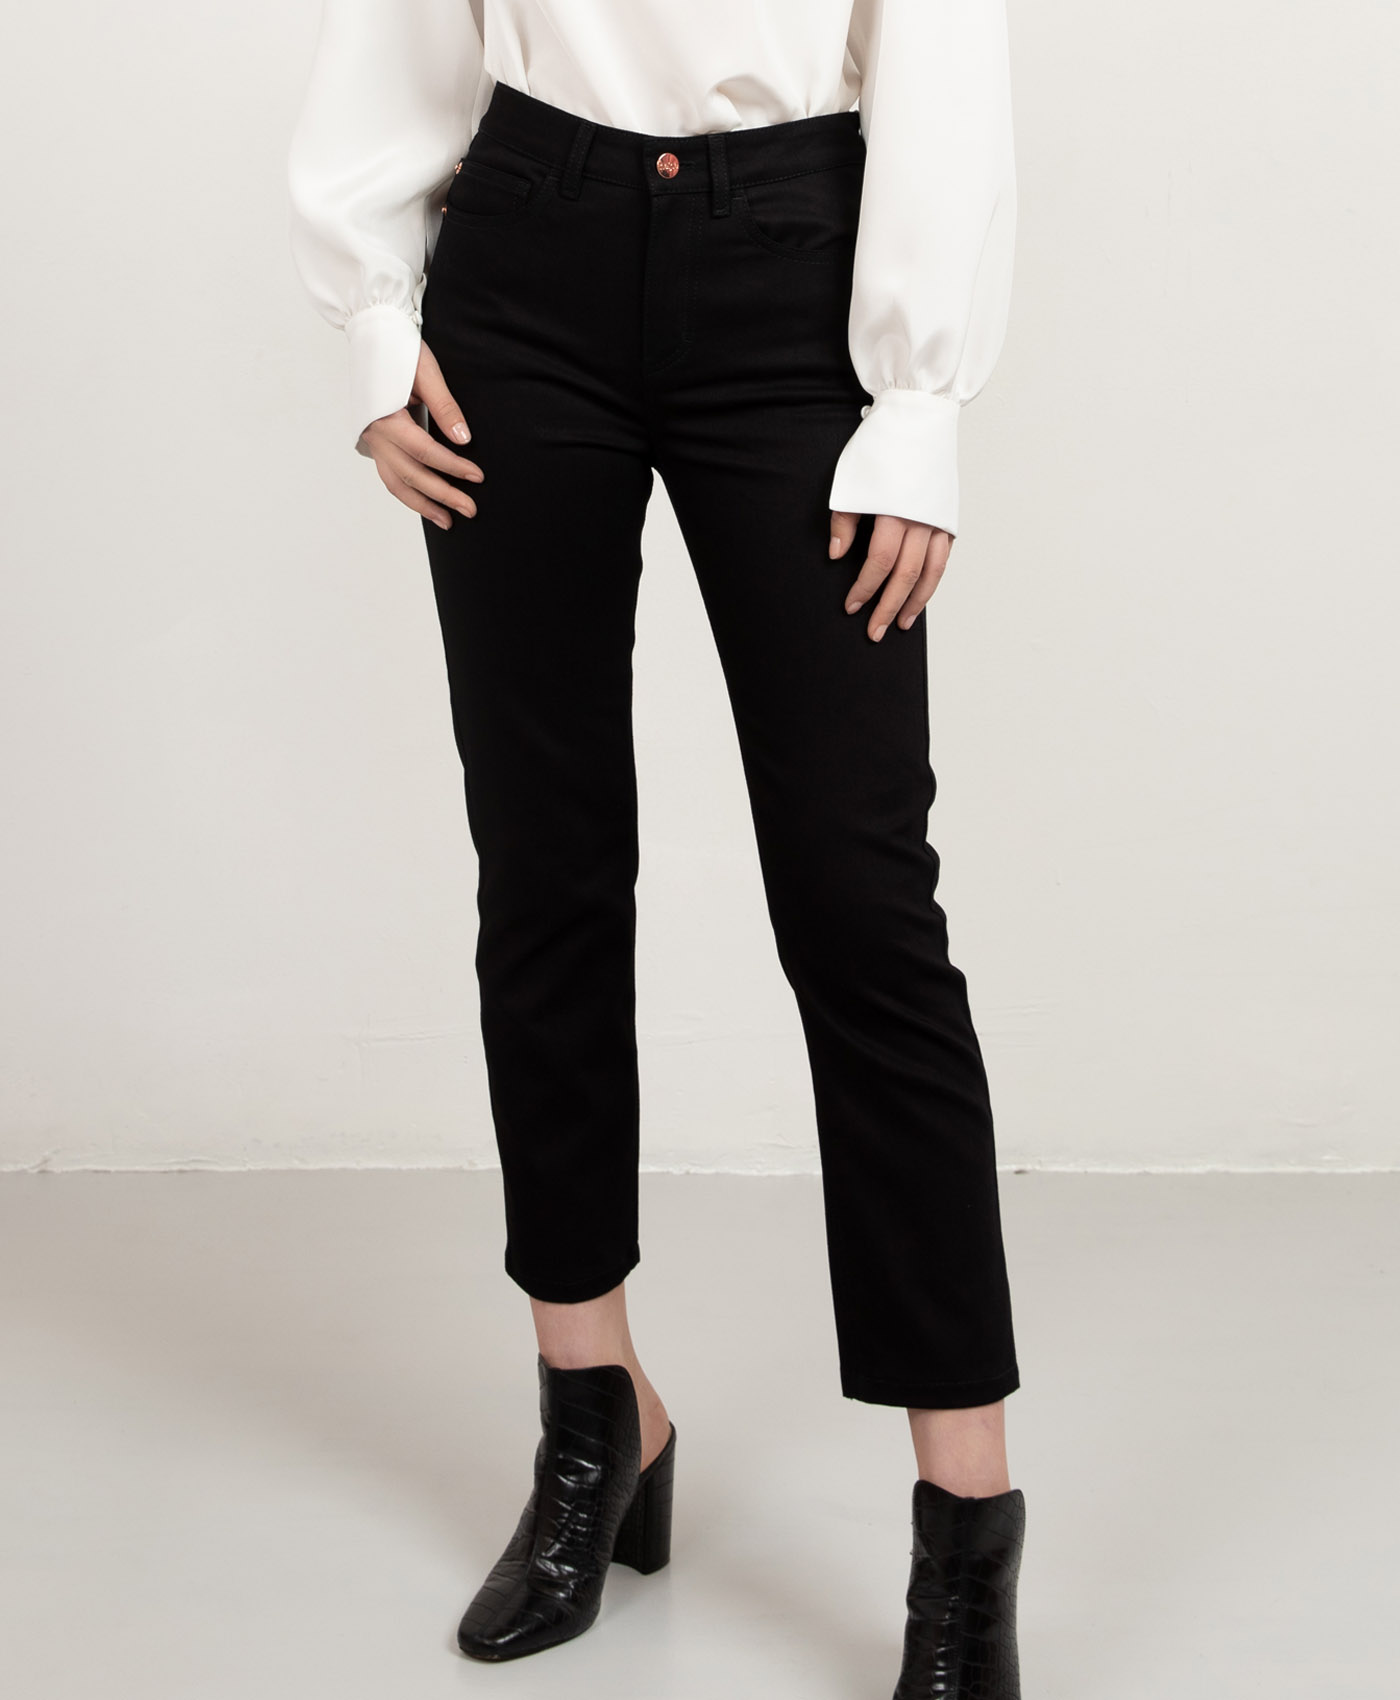 Custom fit cropped jeans in black with matching stitches by Studio Heijne